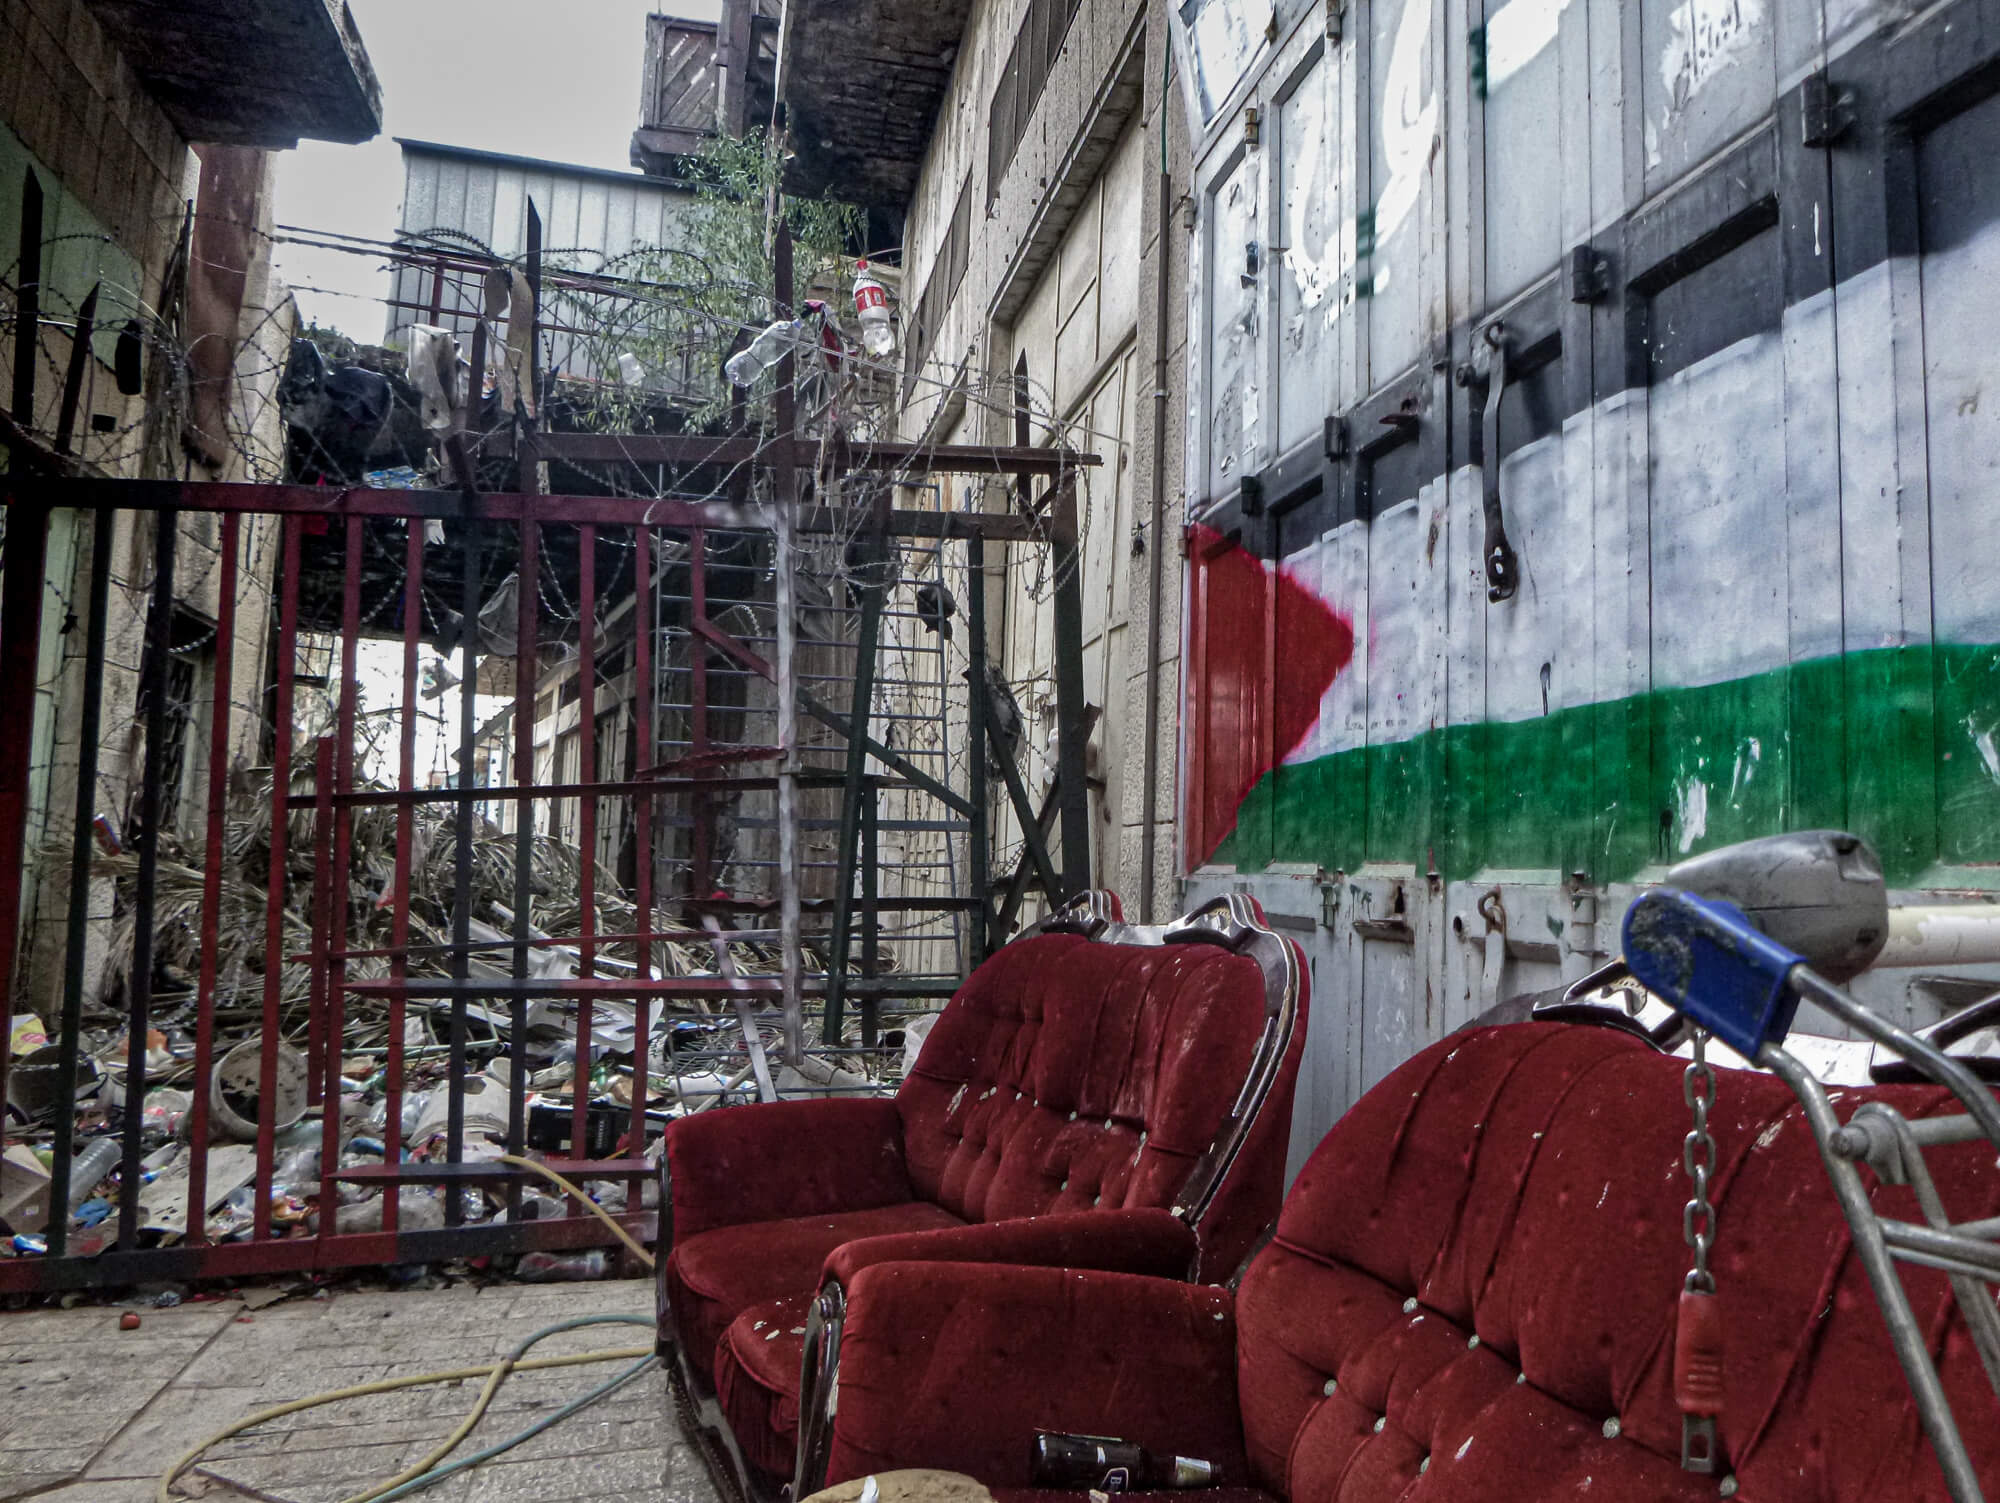 Street art and in a rundown alleyway in Hebron - a challenging place tot ravel to in Palestine